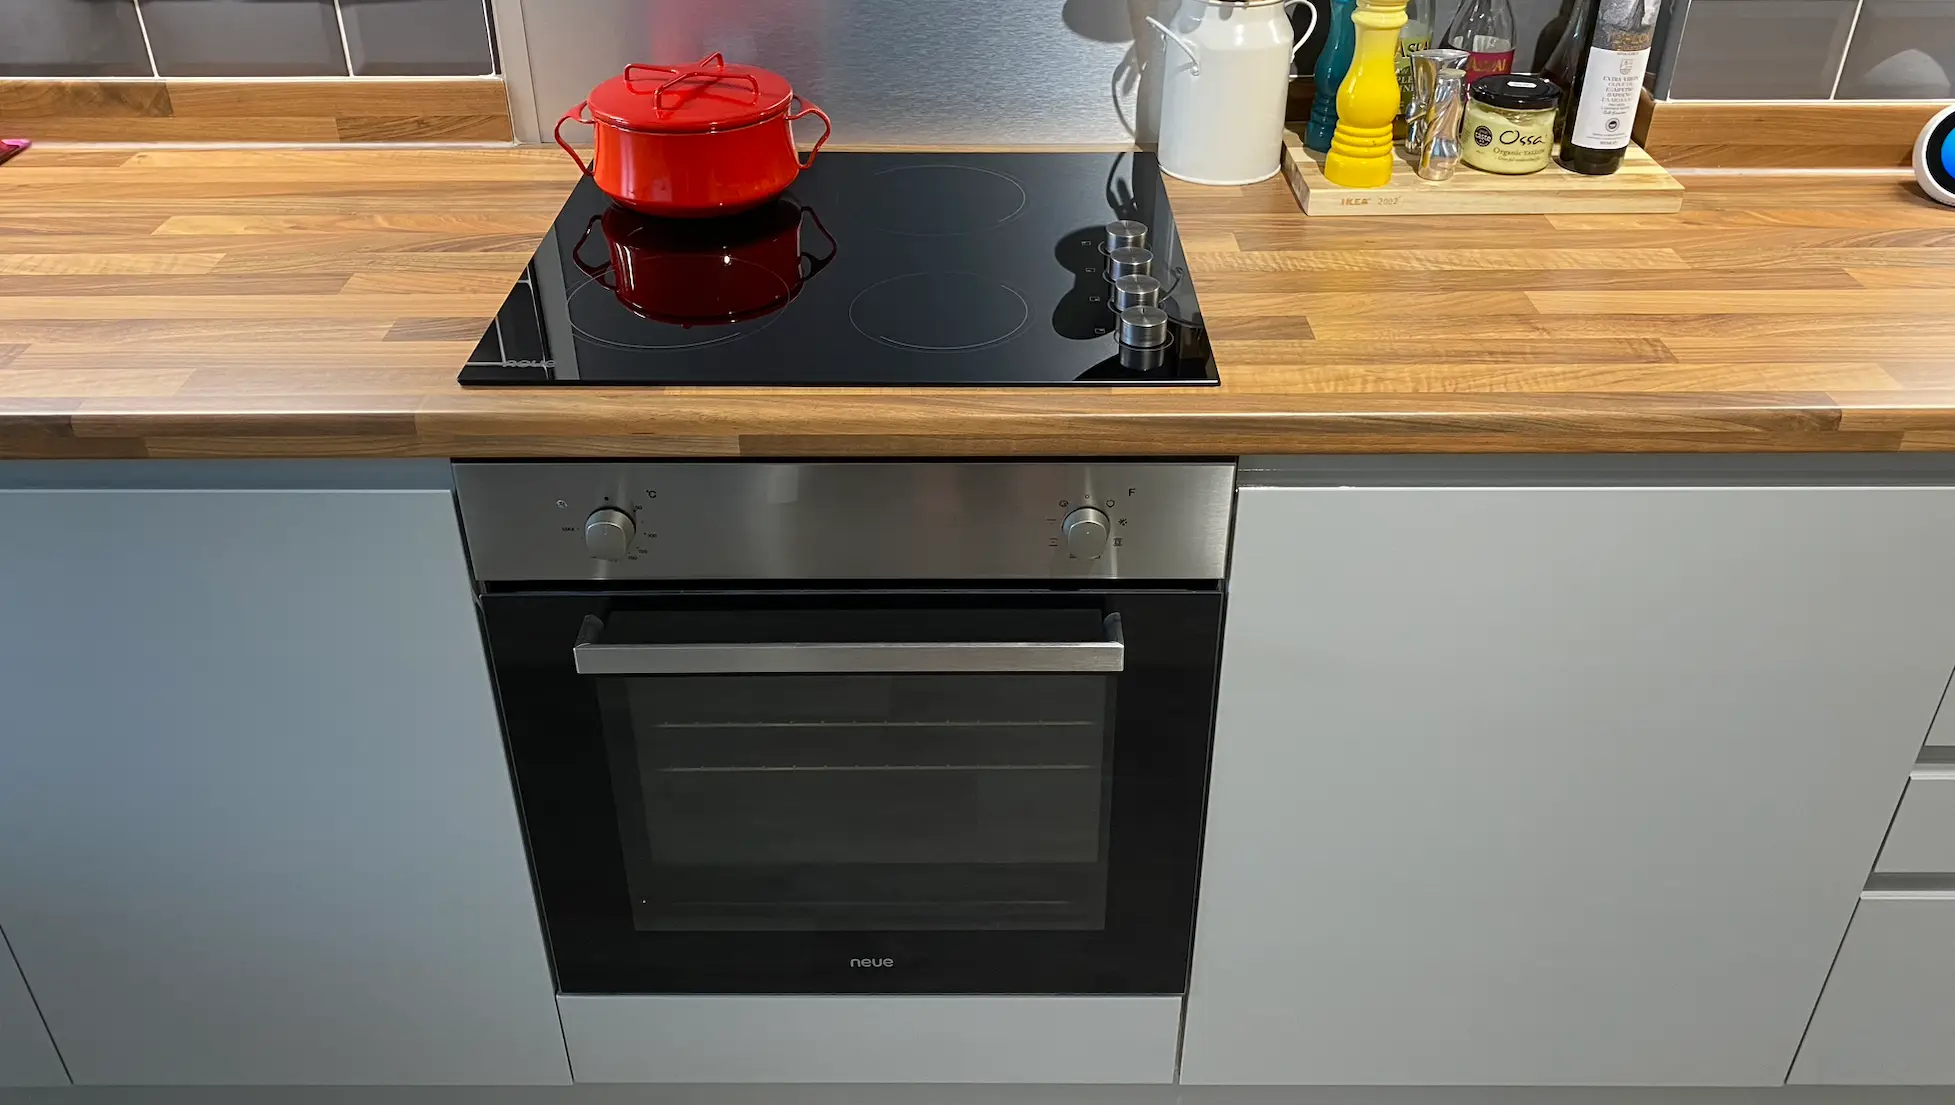 Estimates for fix an electric / induction hob near Woolwich